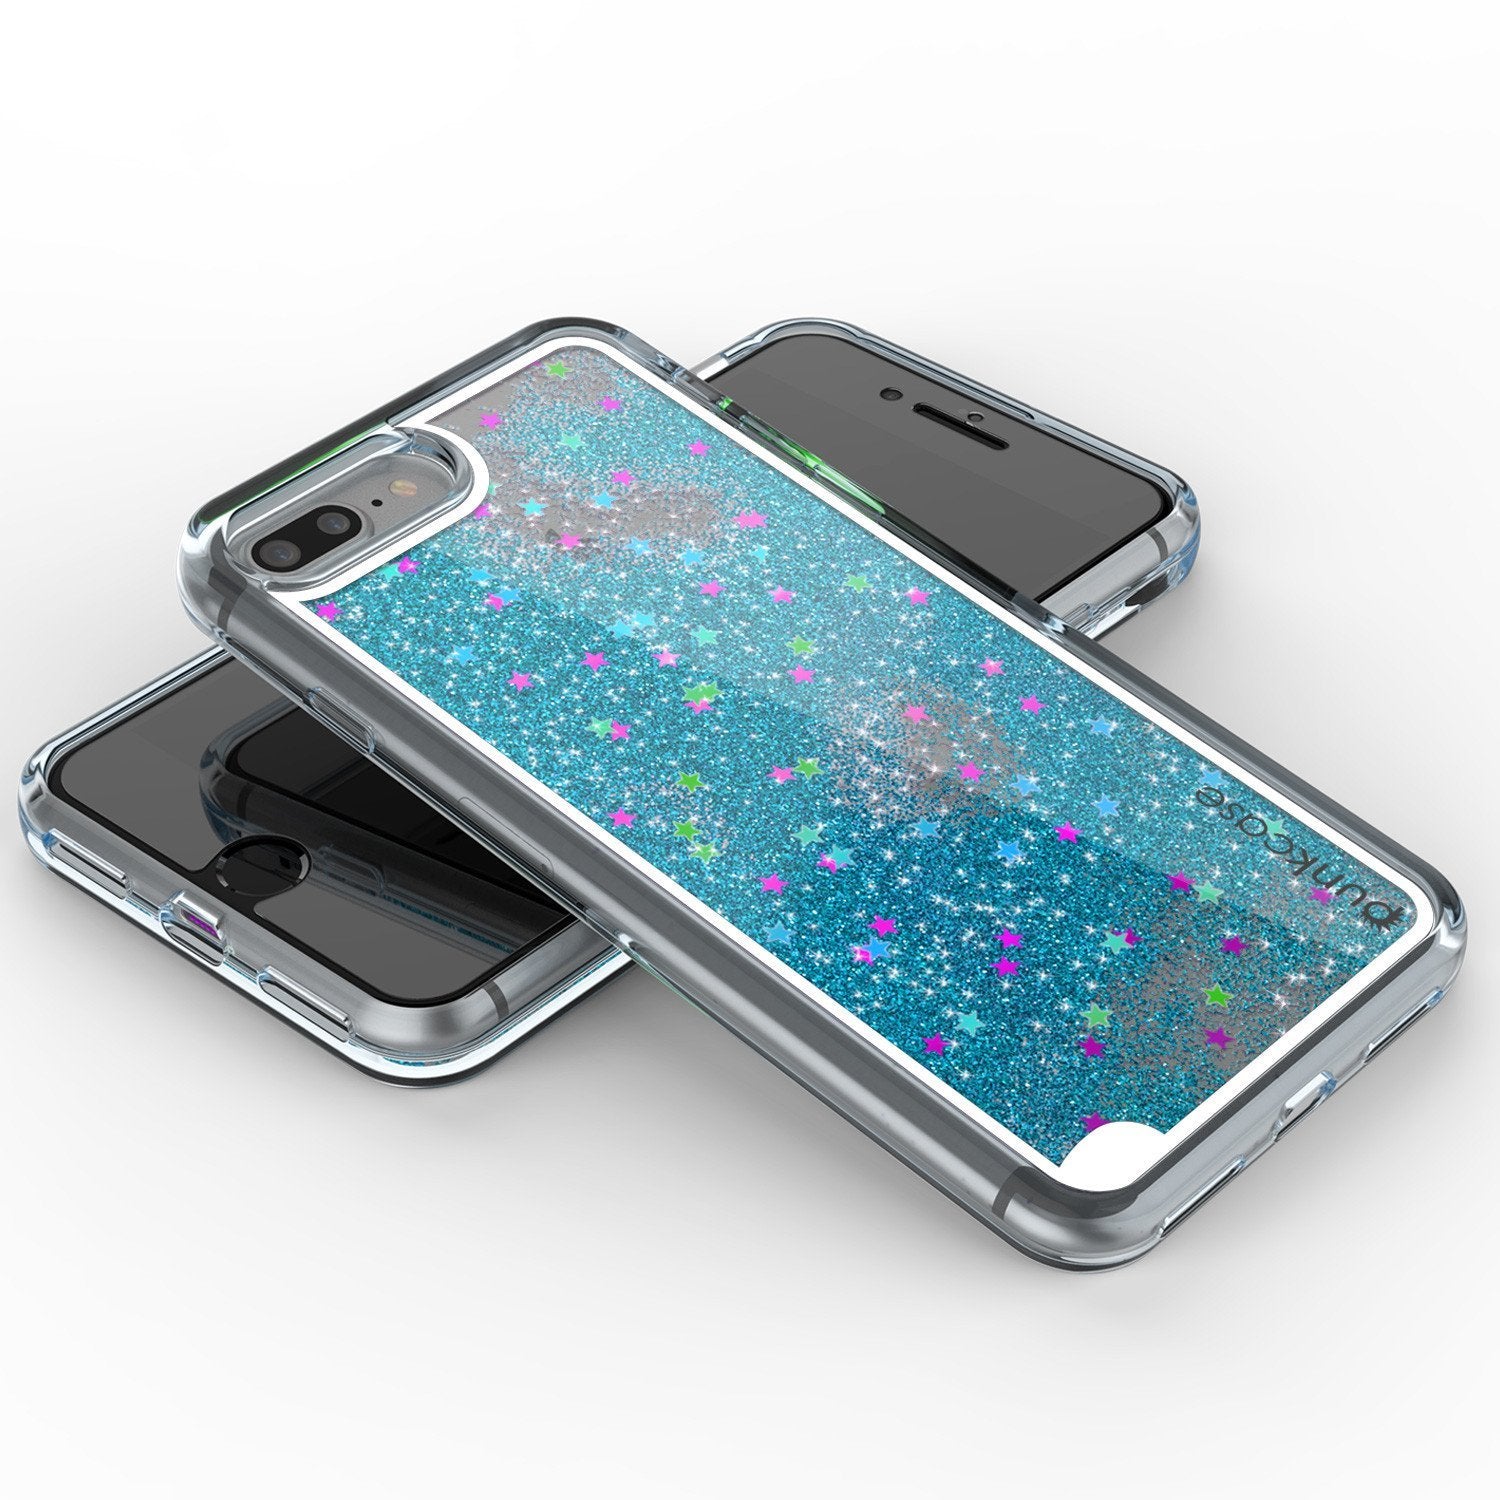 iPhone 8+ Plus Case, PunkCase LIQUID Teal Series, Protective Dual Layer Floating Glitter Cover - PunkCase NZ